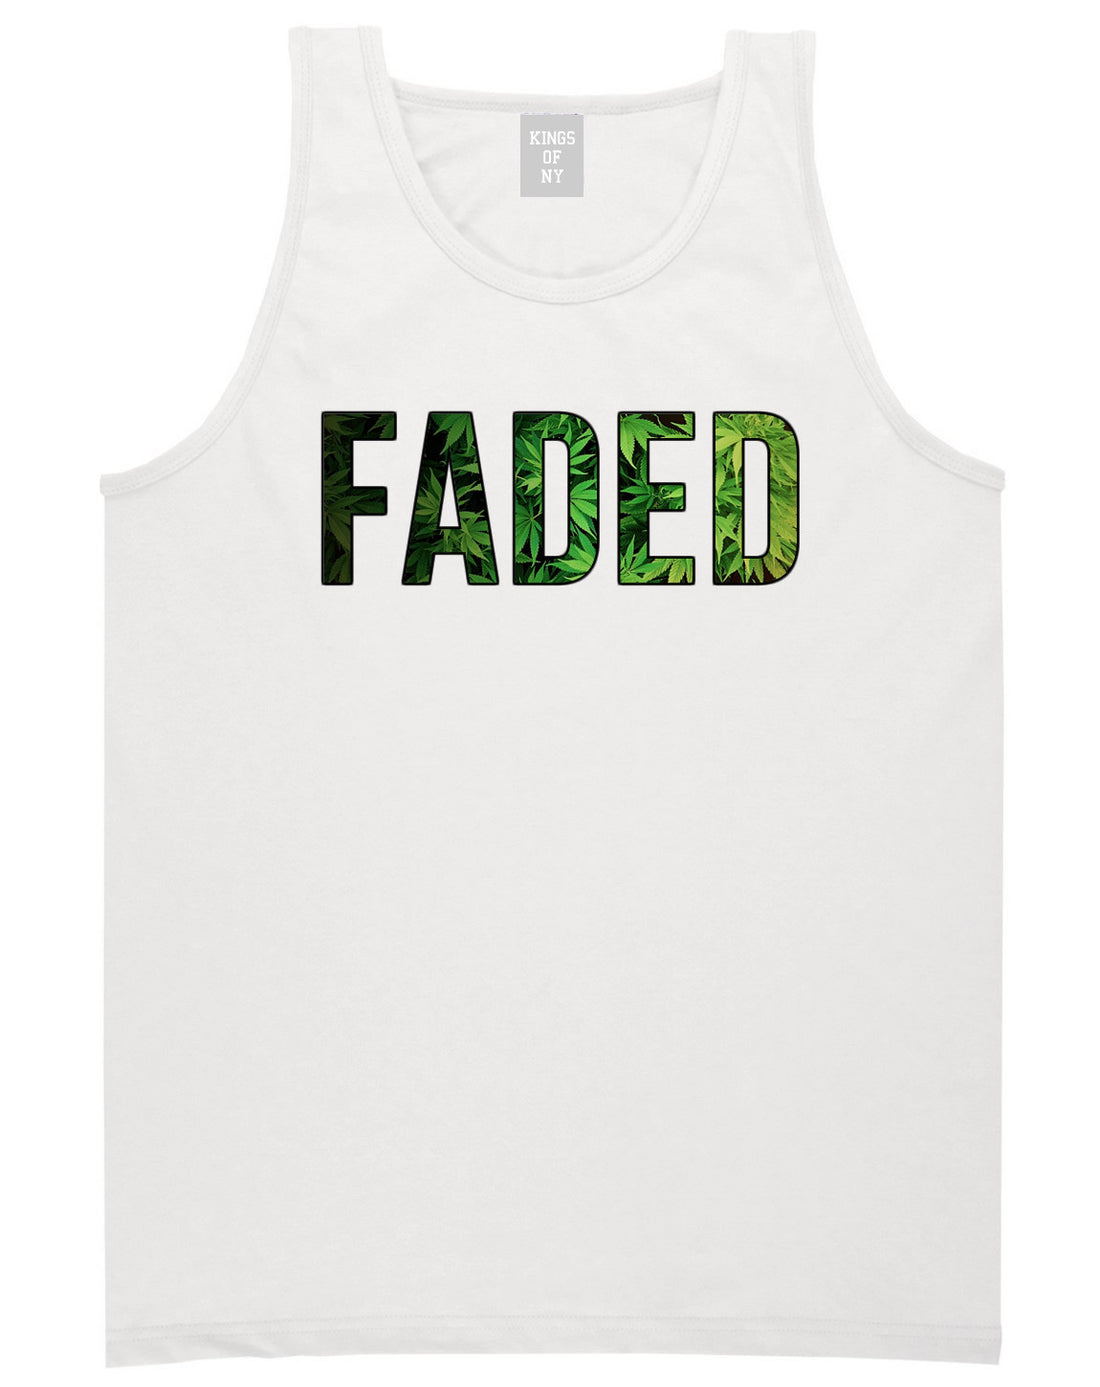 Faded Plant Life Marijuana Drugs Legalize Tank Top In White by Kings Of NY